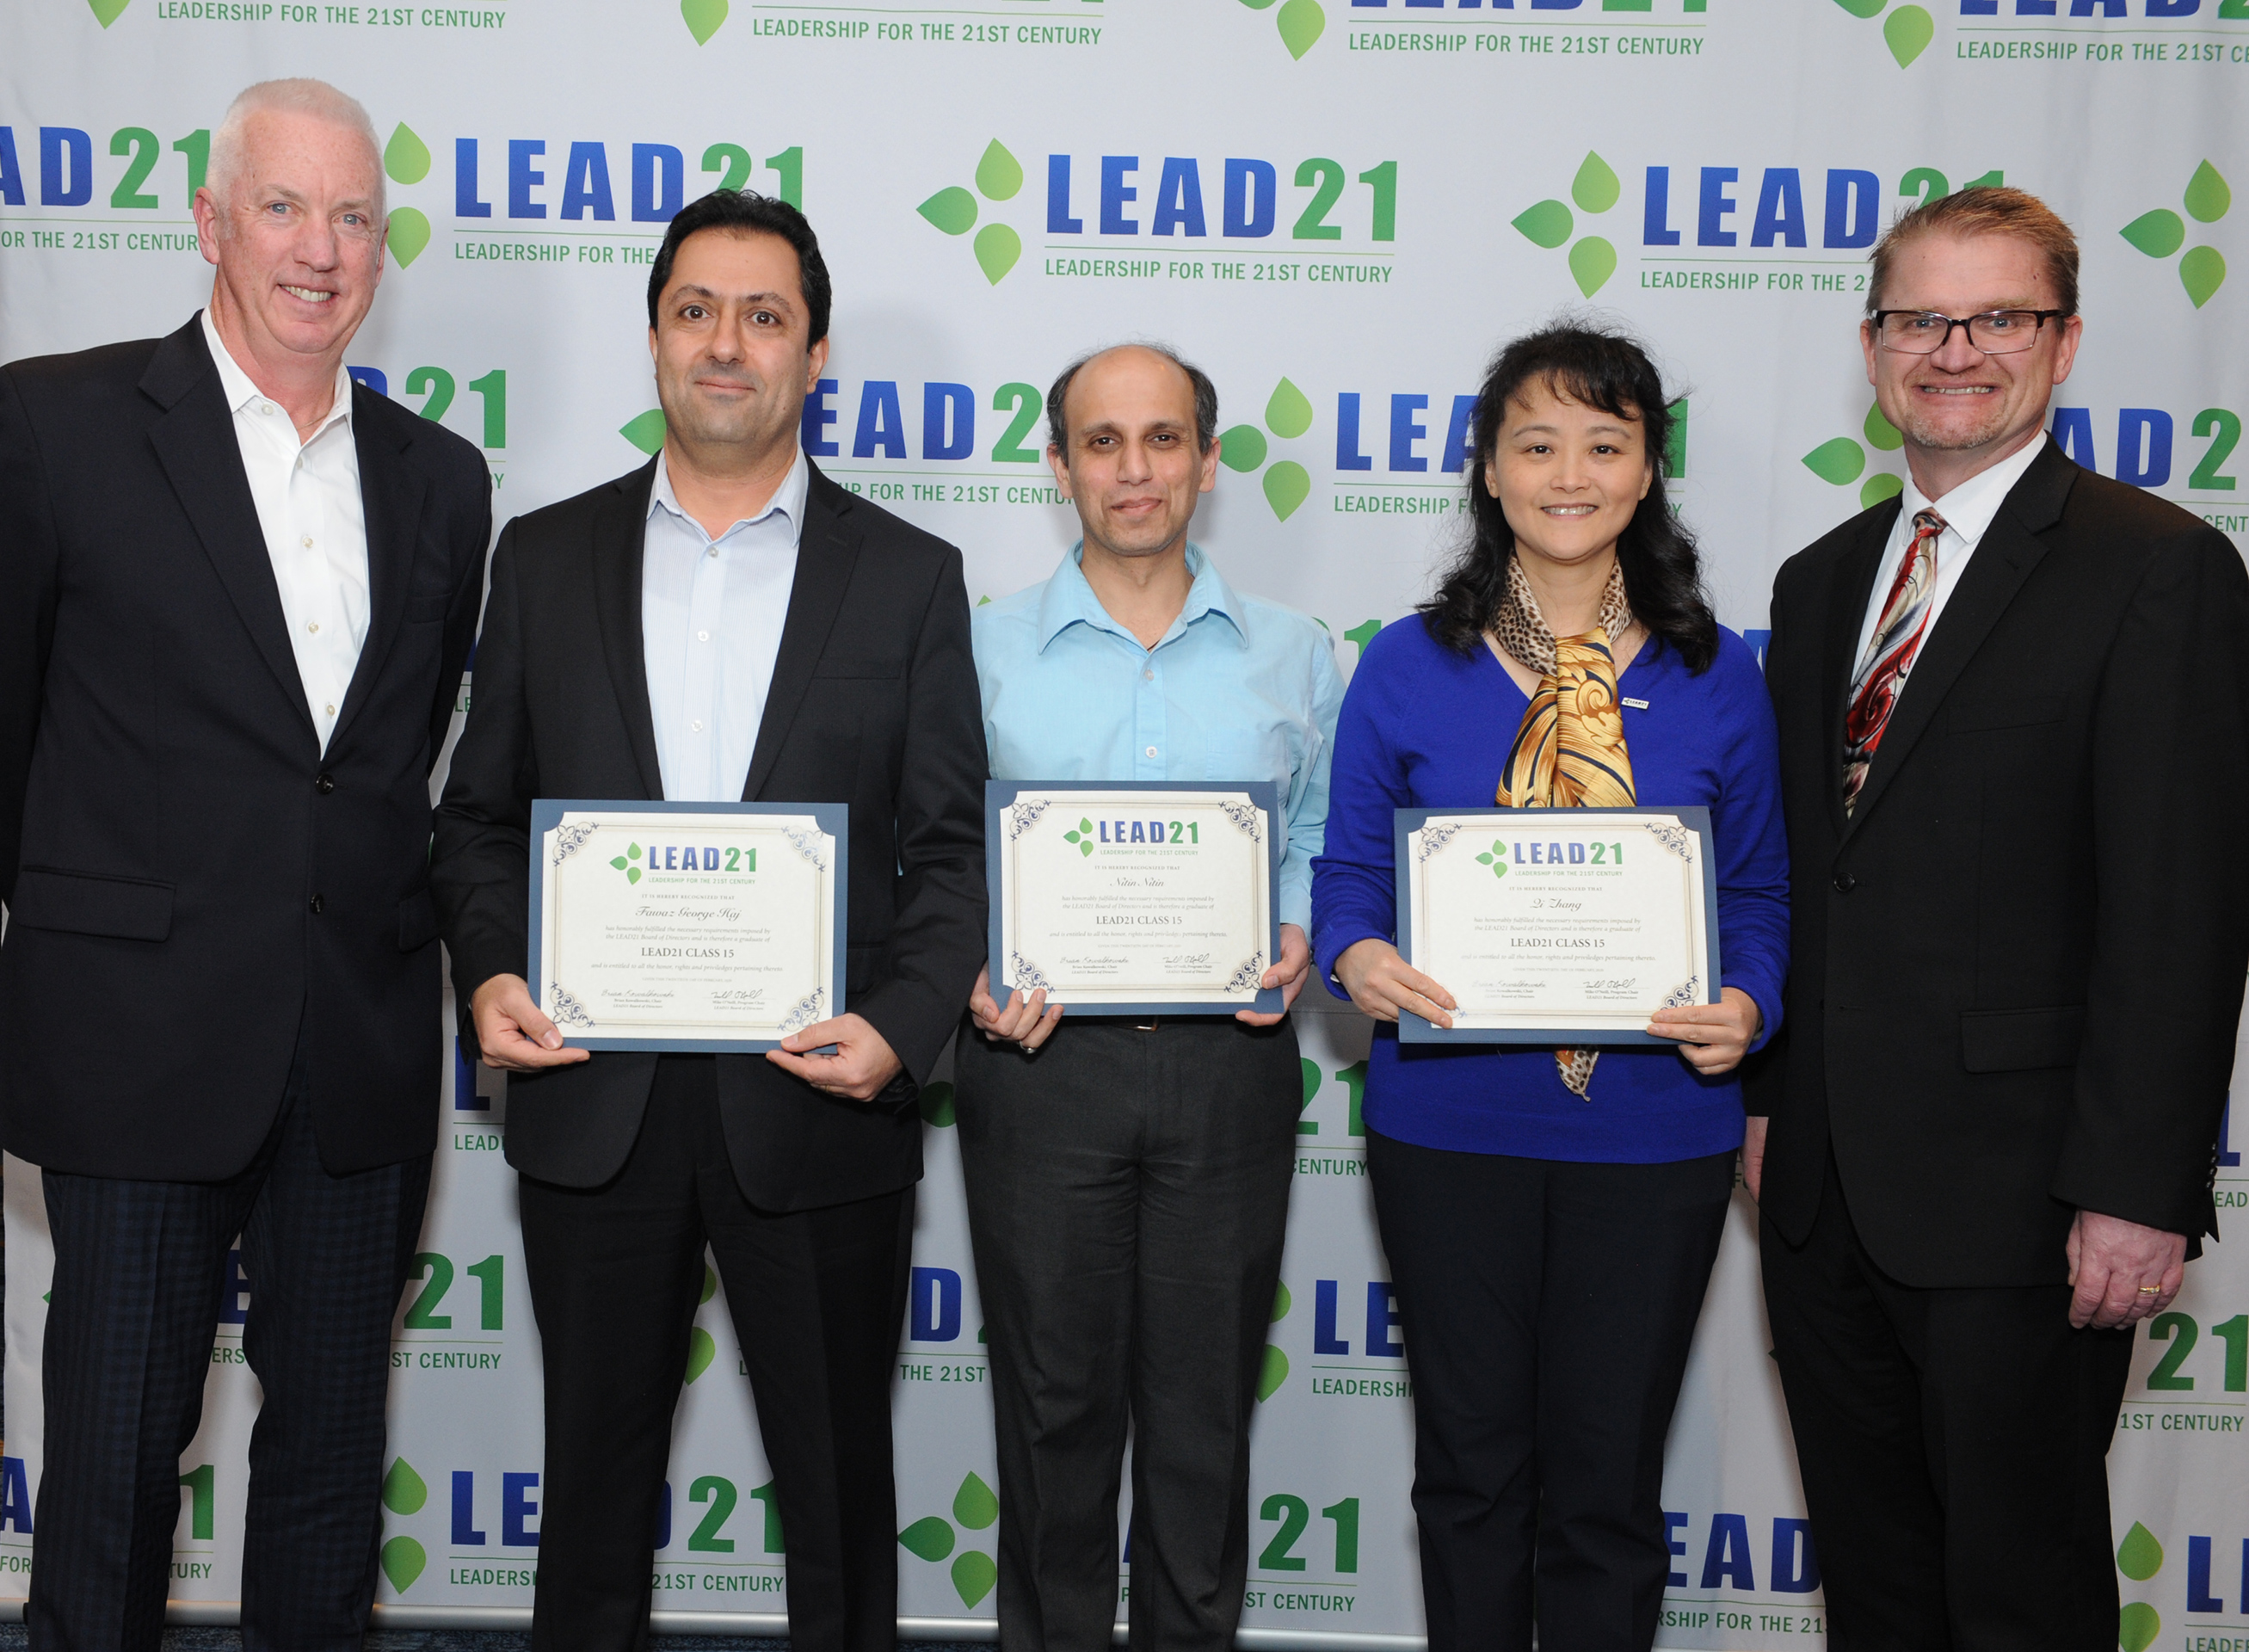 LEAD21 program chair Mike O’Neill from the University of Connecticut, UC Davis nutrition professors Fawaz Haj and Nitin, UC Davis environmental toxicology professor Qi Zhang, and Lead 21 board chair Brian Kowalkowski from the College of Menominee Nation